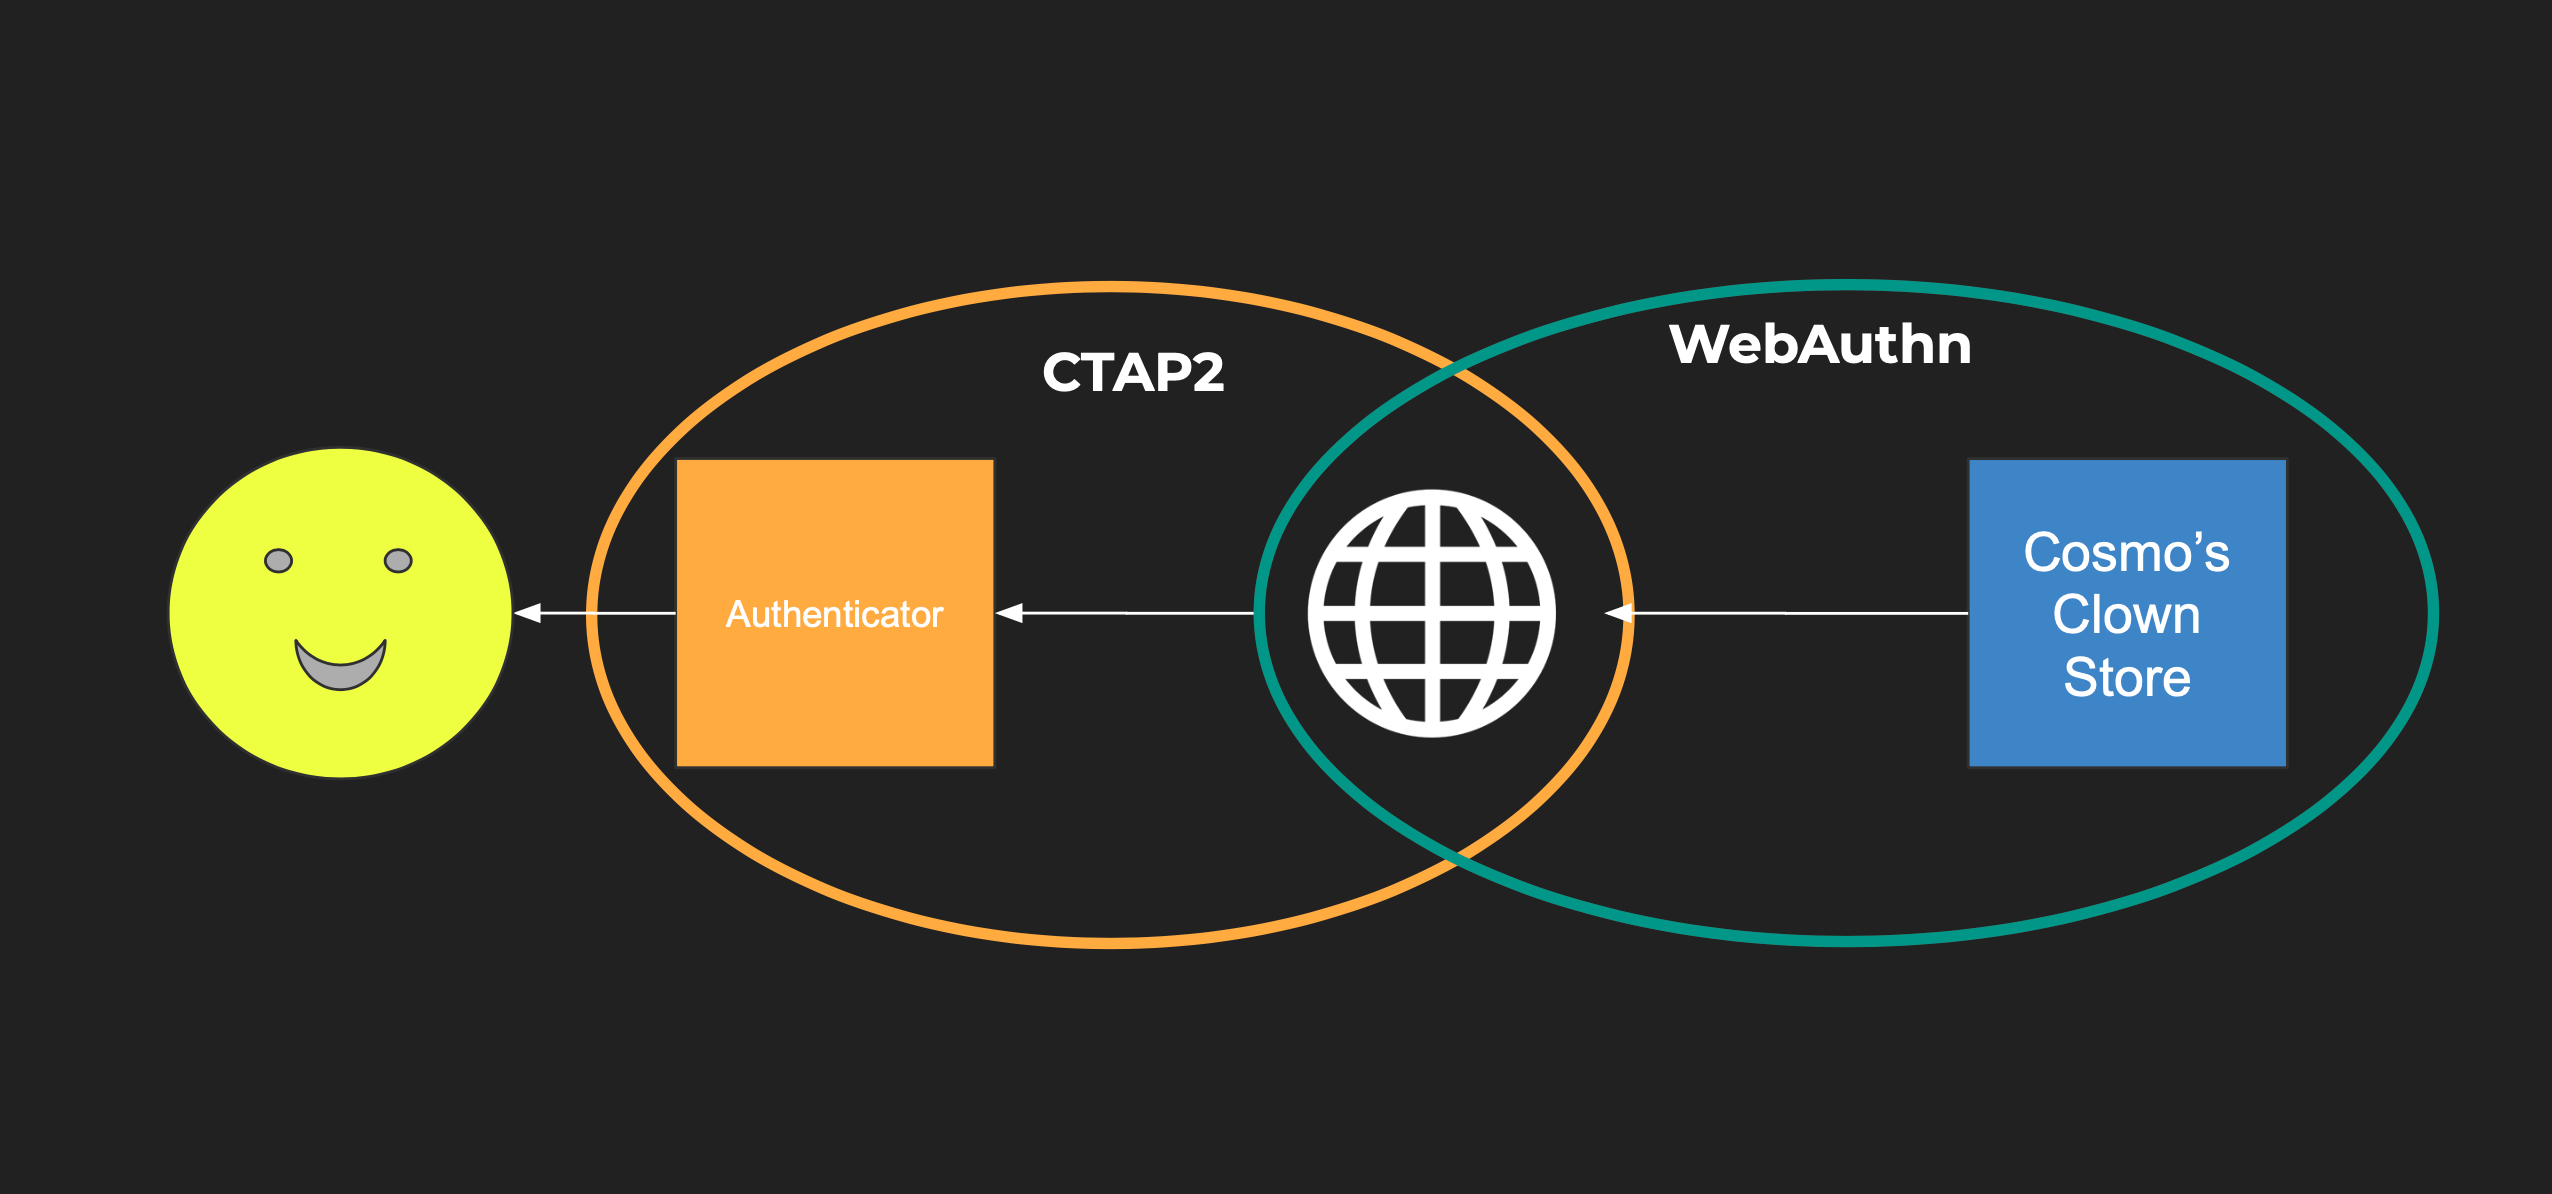 Showing the difference between CTAP2 and WebAuthn.